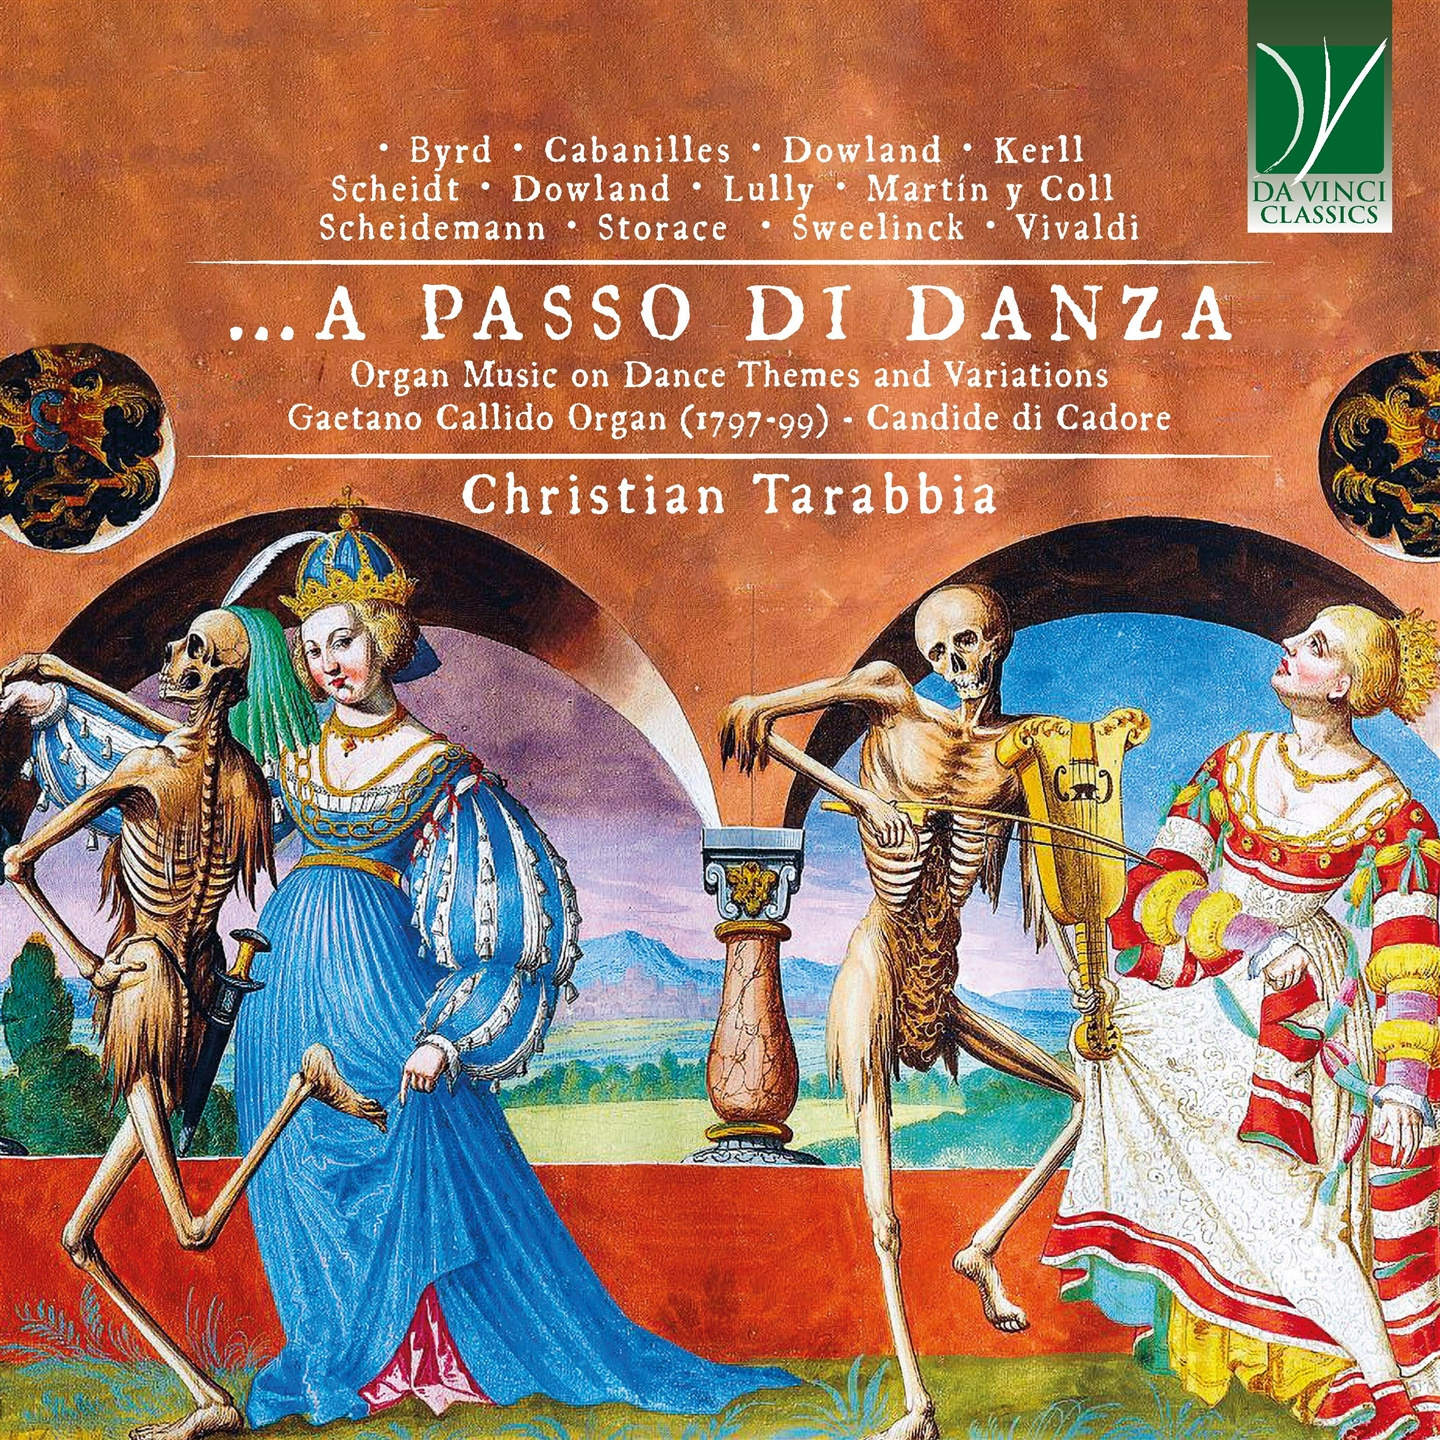 A PASSO DI DANZA - ORGAN MUSIC ON DANCE THEMES AND VARIATIONS